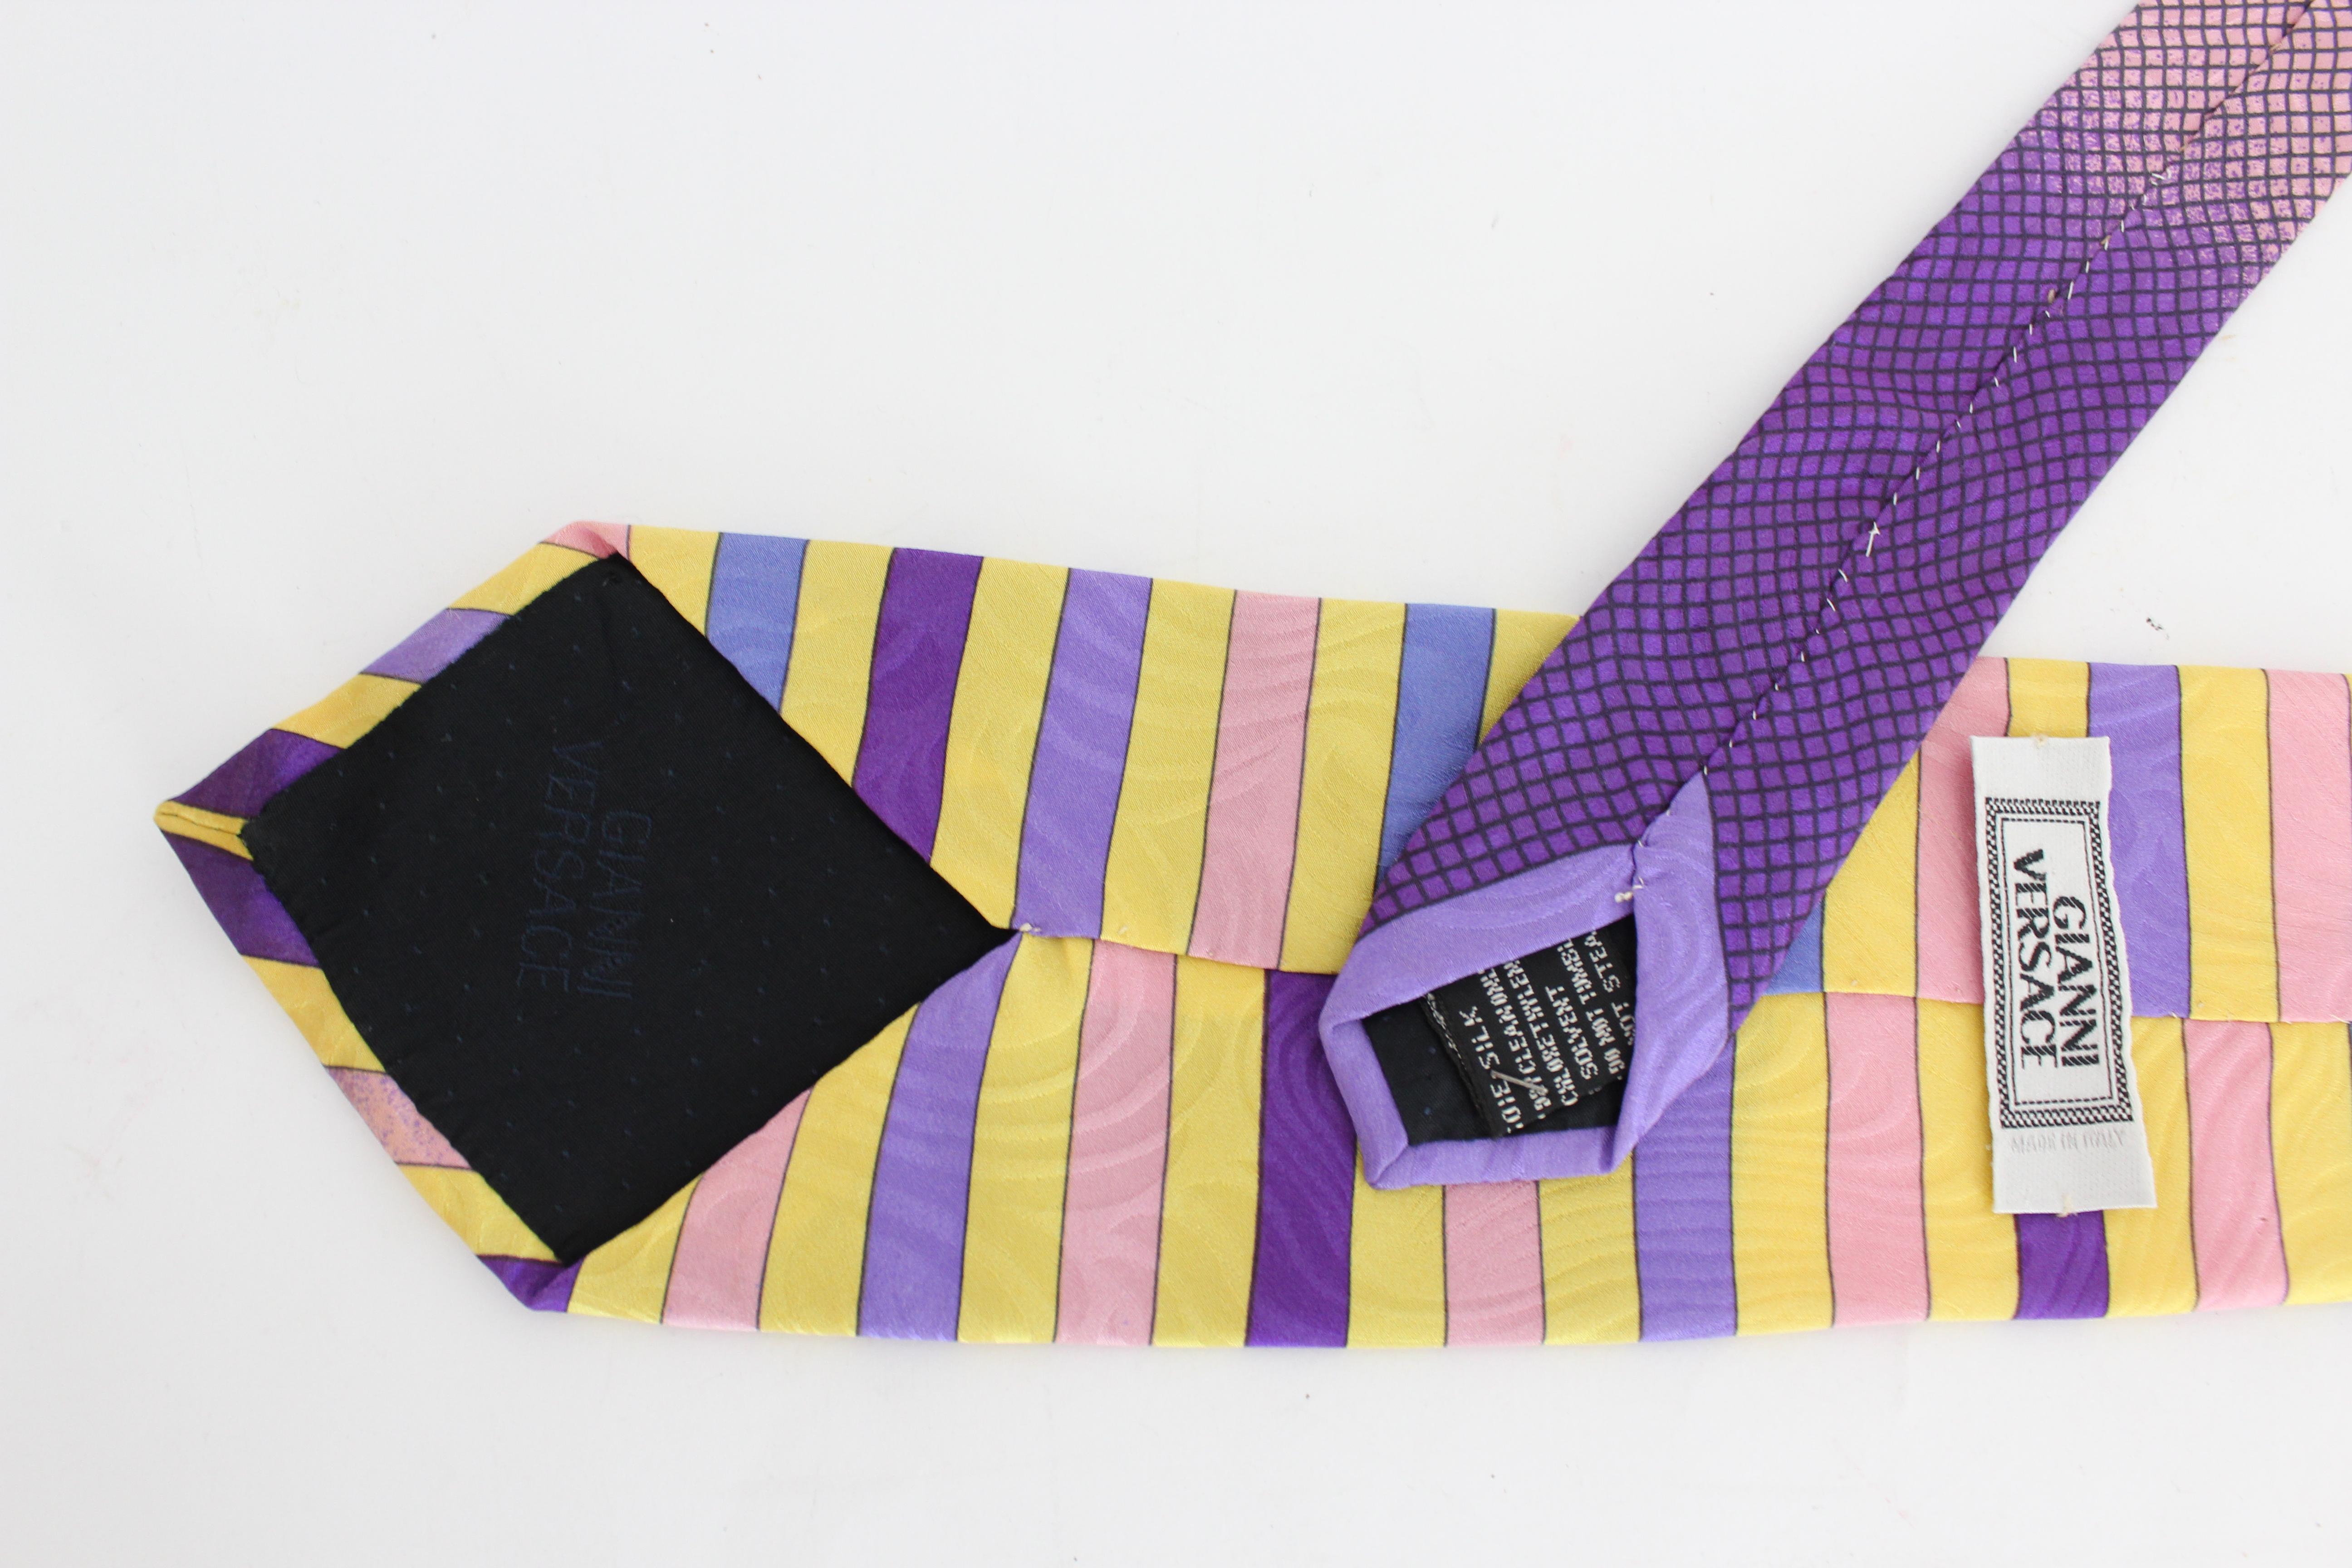 Gianni Versace vintage 80s tie. Yellow, blue and purple with striped pattern and printed medusa logo. 100% silk fabric. Made in Italy.

Length: 145 cm
Width: 8.5 cm